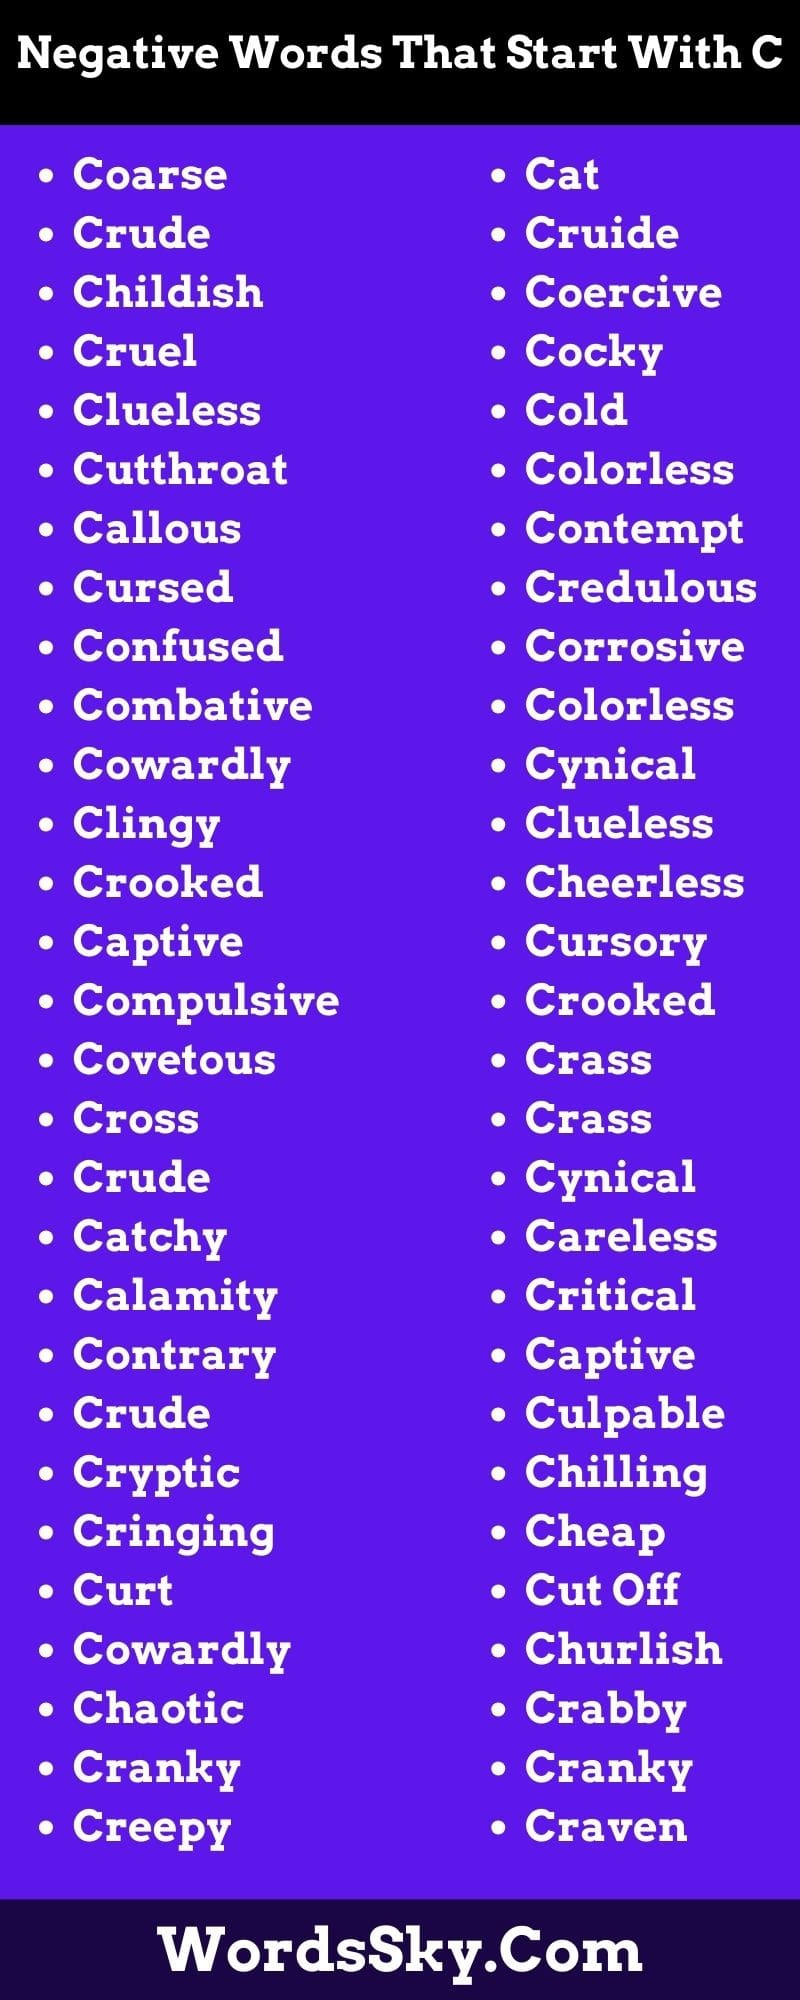 Negative Words That Start With C